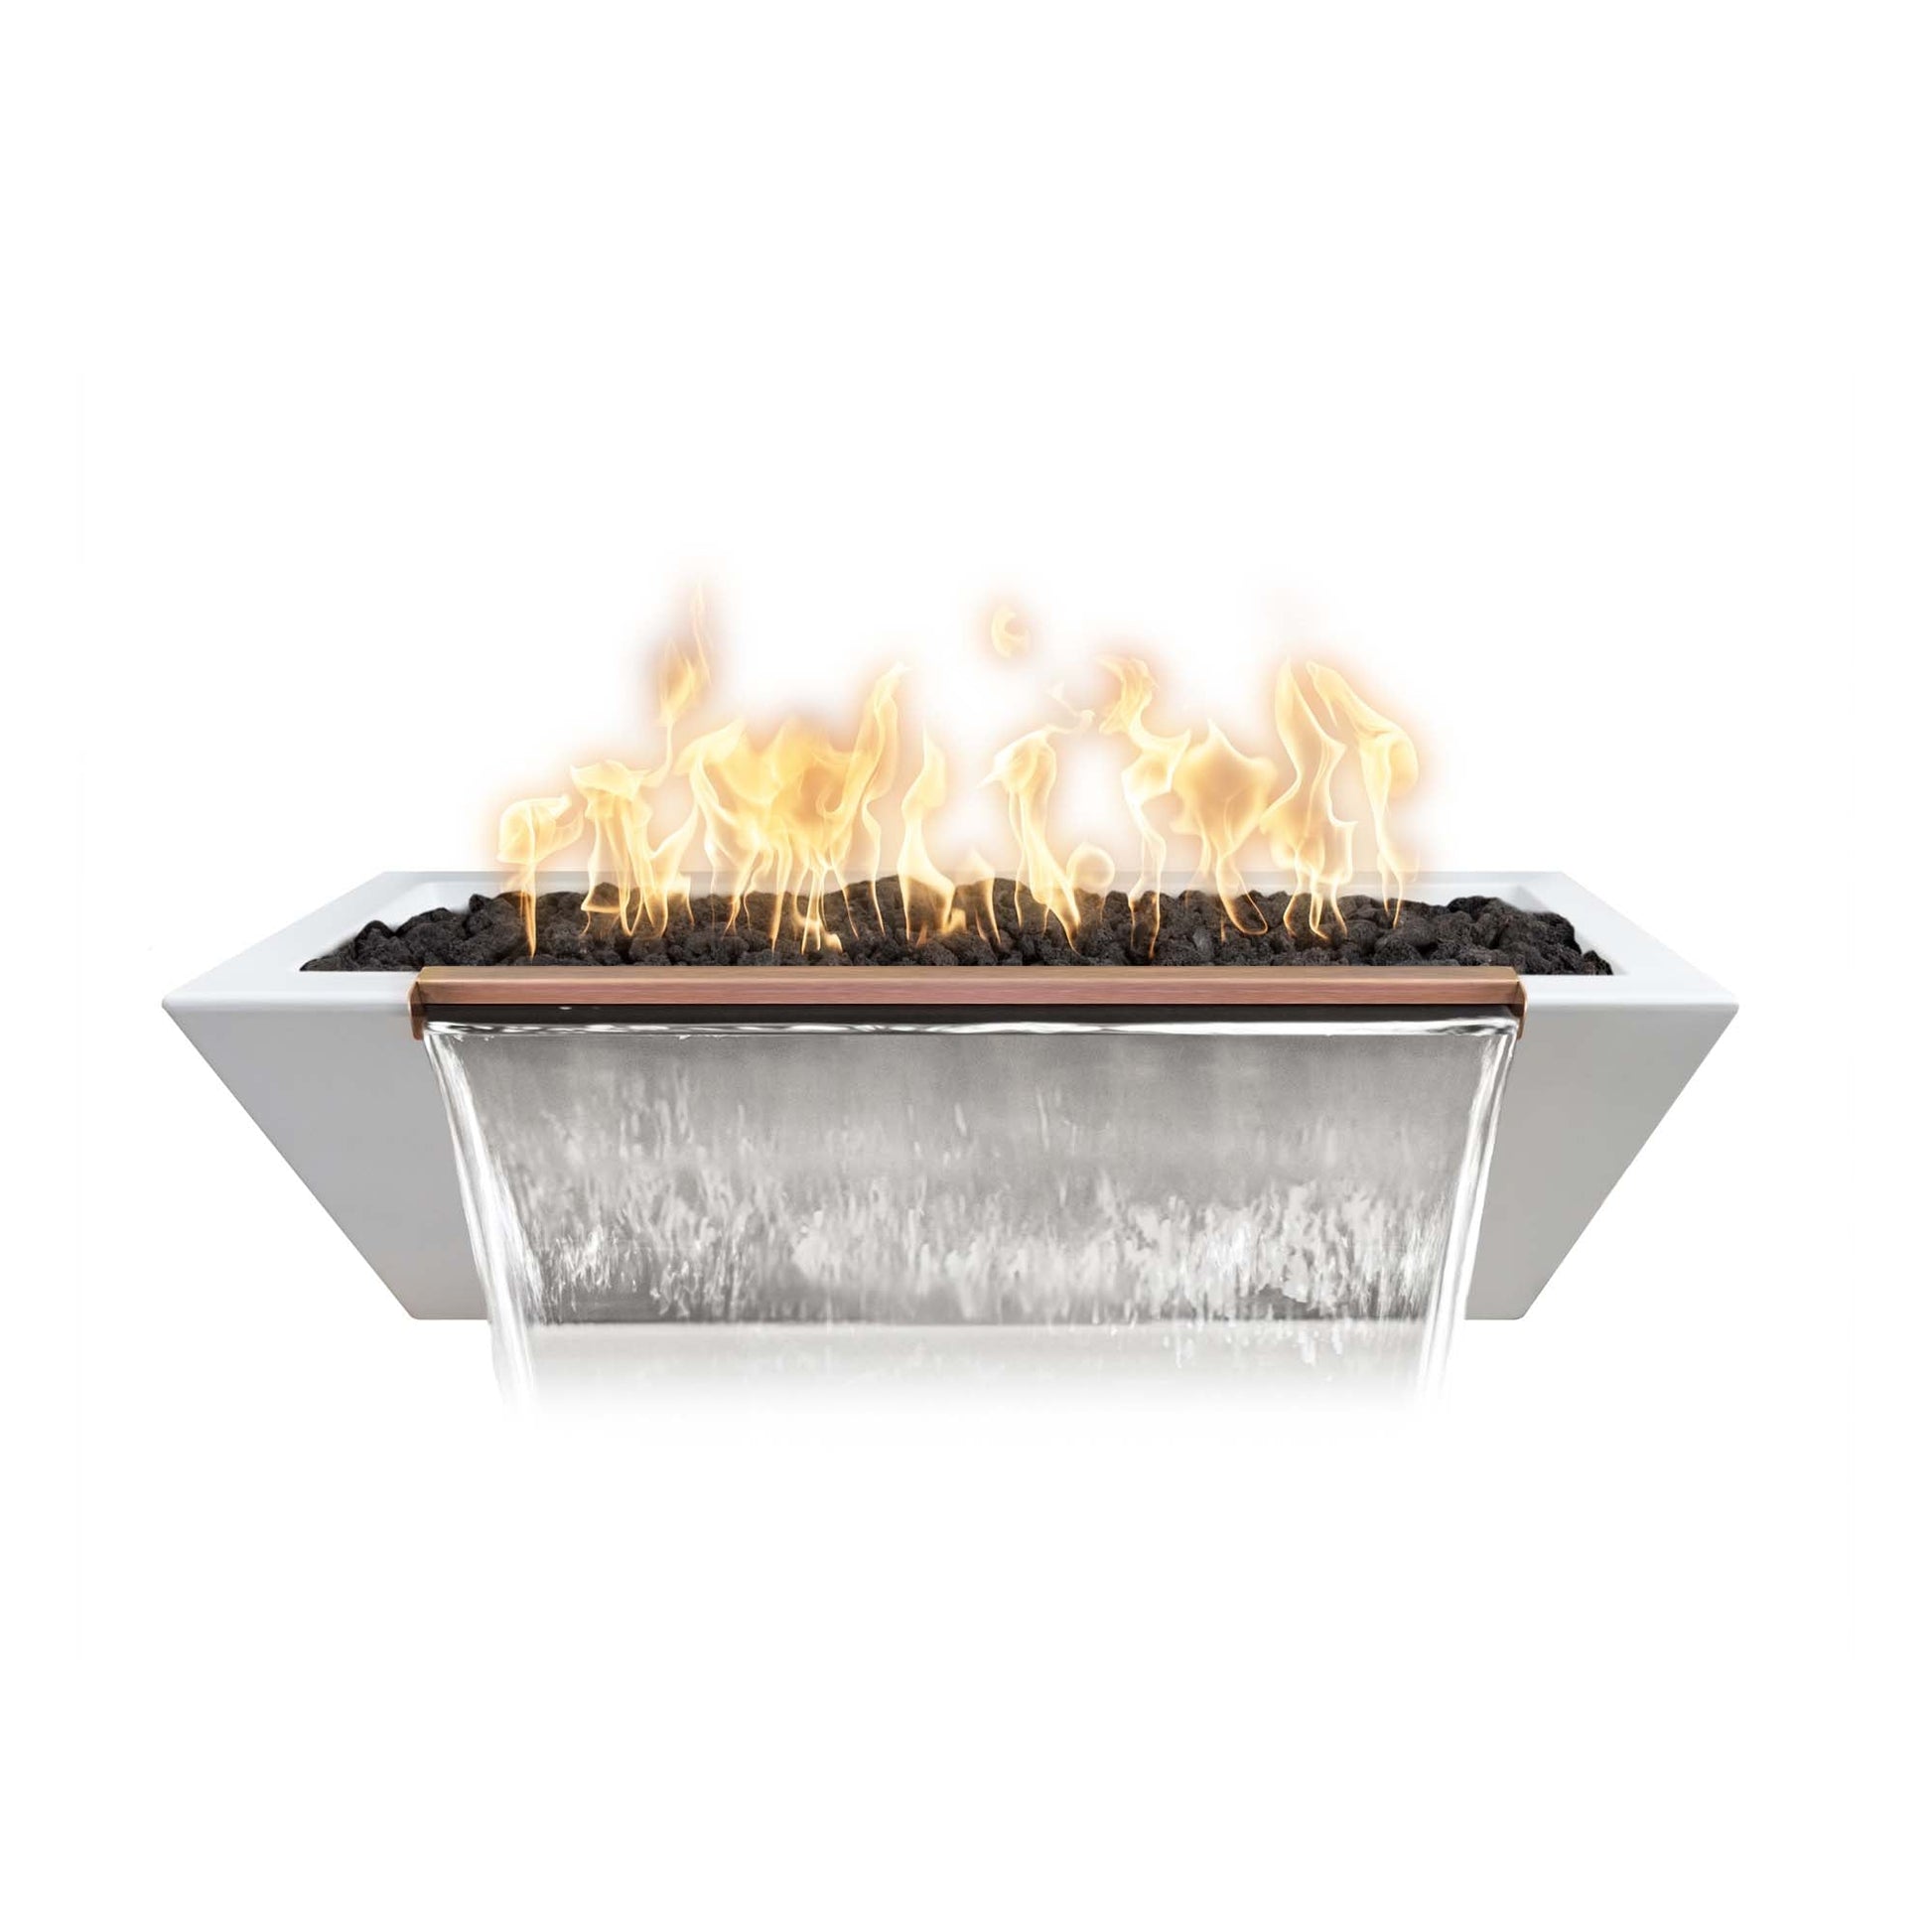 The Outdoor Plus Linear Maya 72" Metallic Slate GFRC Concrete Natural Gas Fire & Water Bowl with Match Lit with Flame Sense Ignition